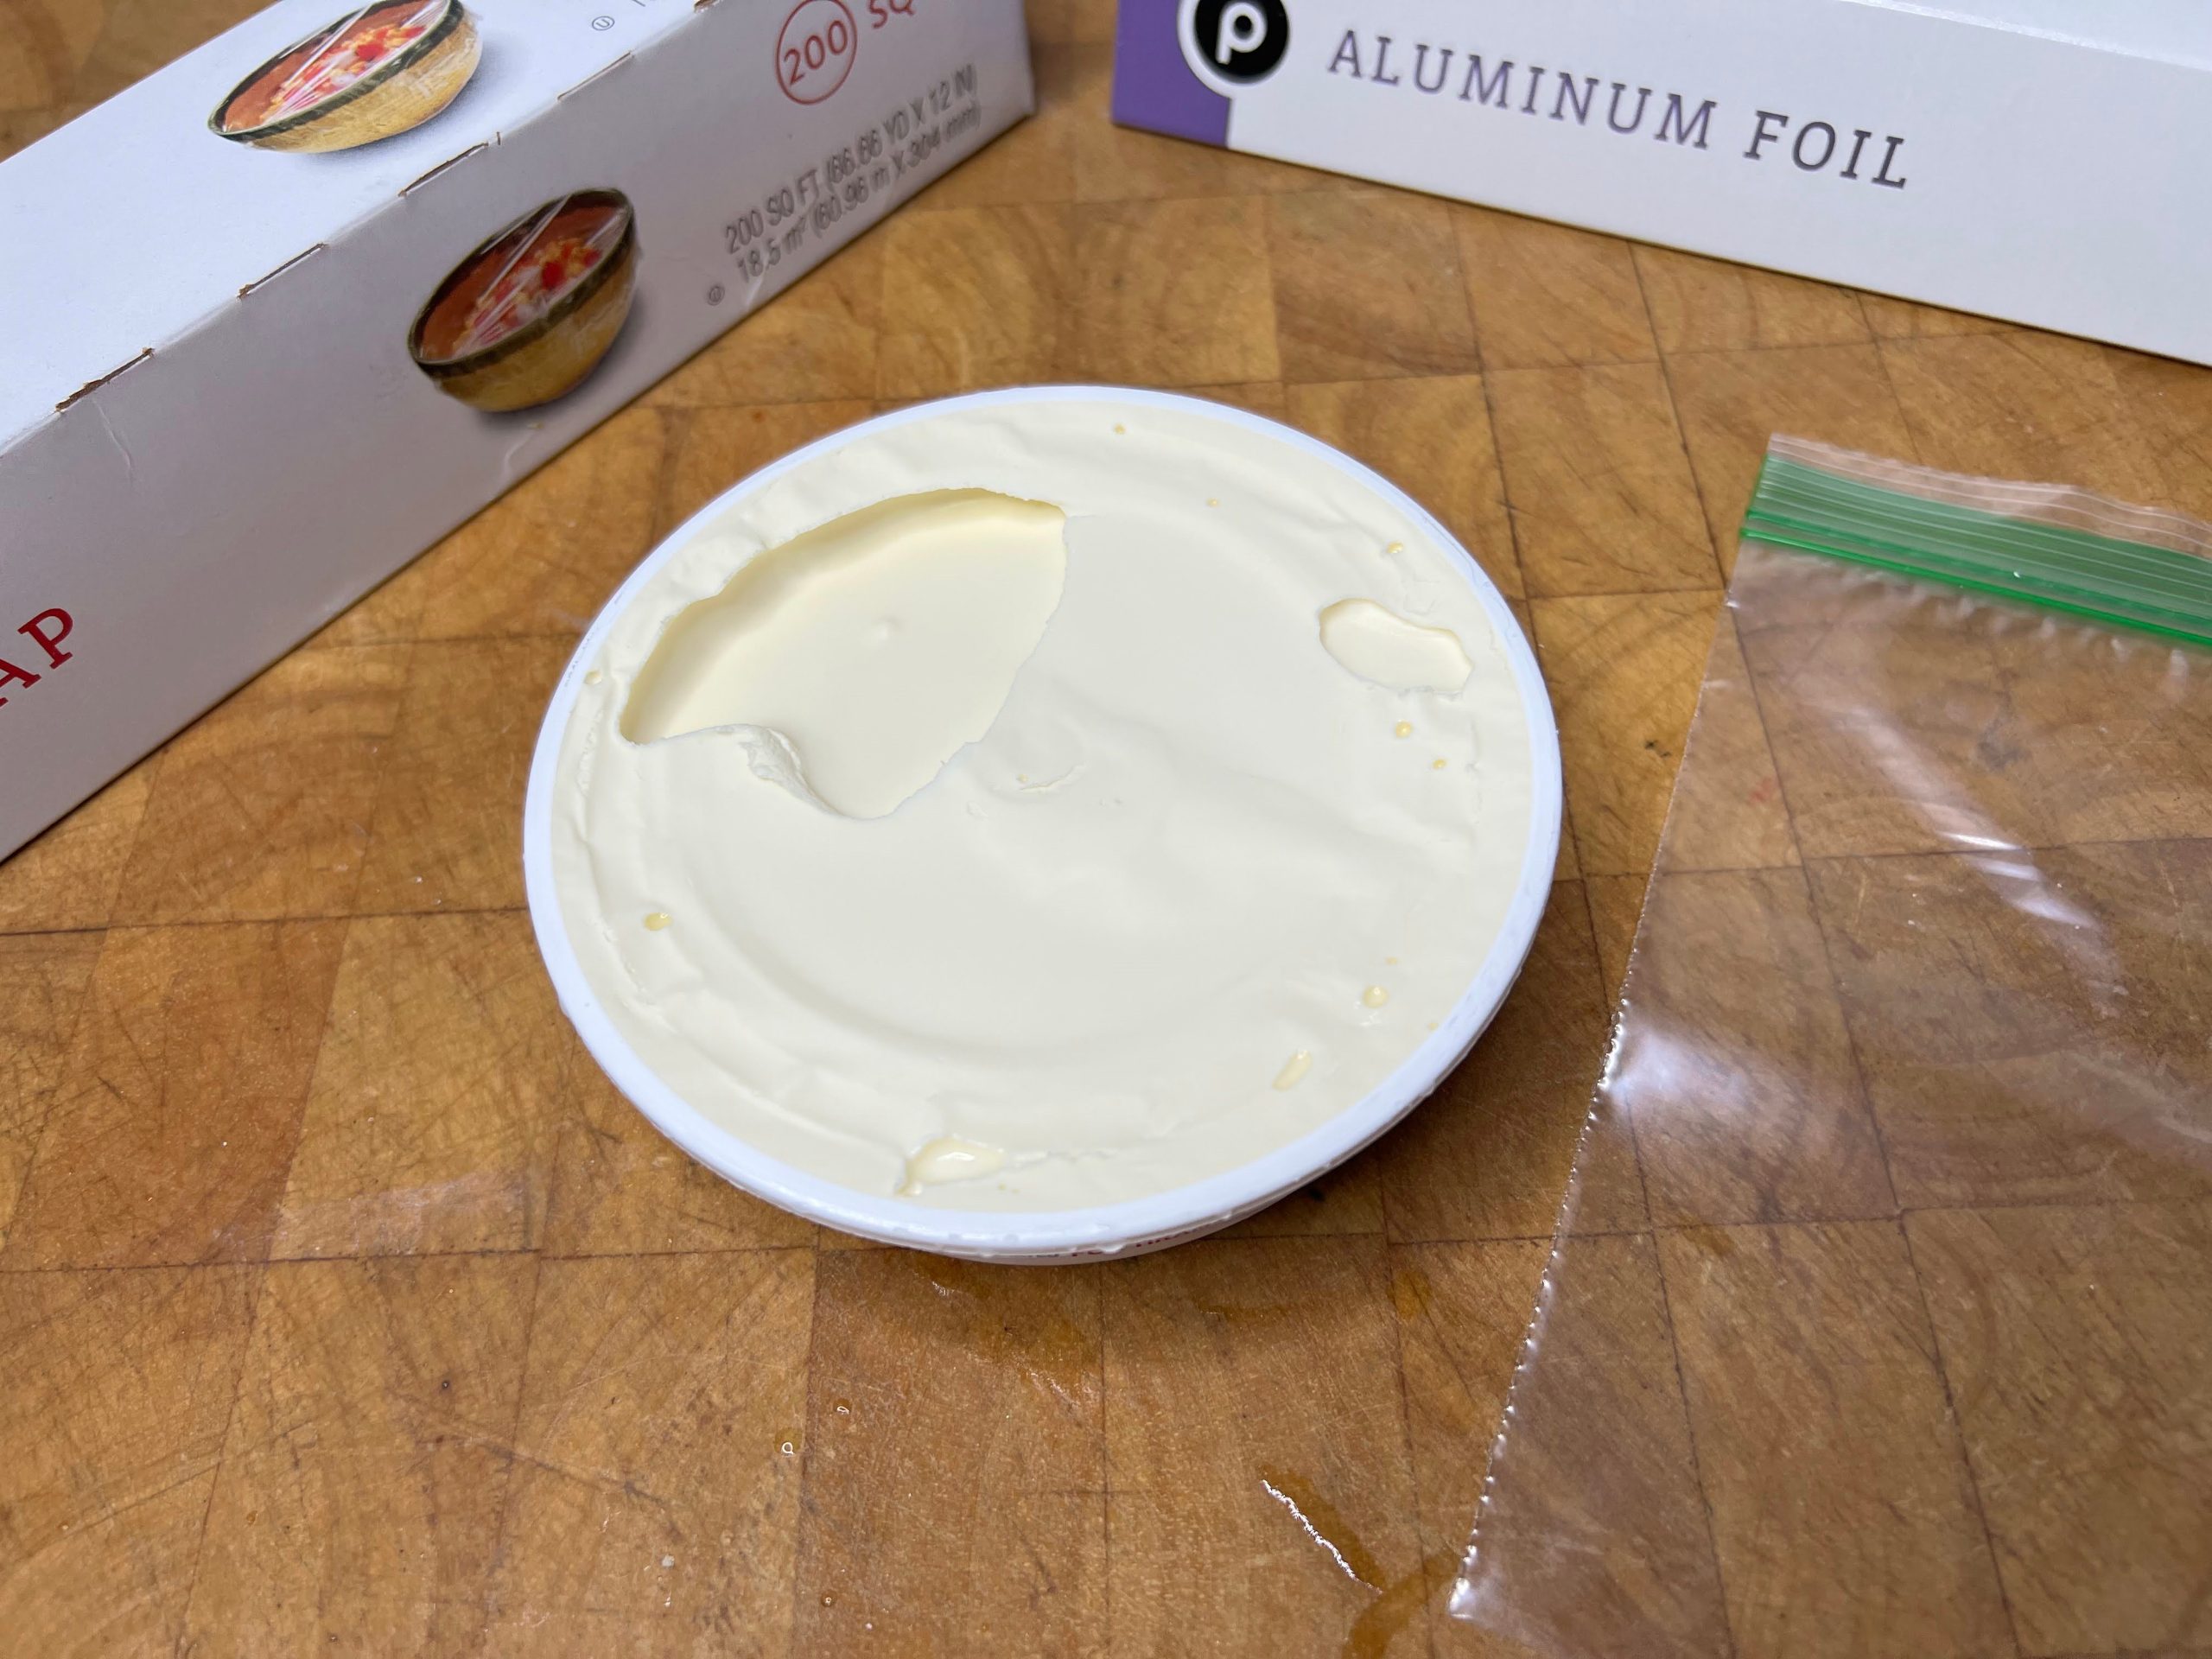 container of mascarpone cheese next to an empty freezer bag, plastic wrap and aluminum foil